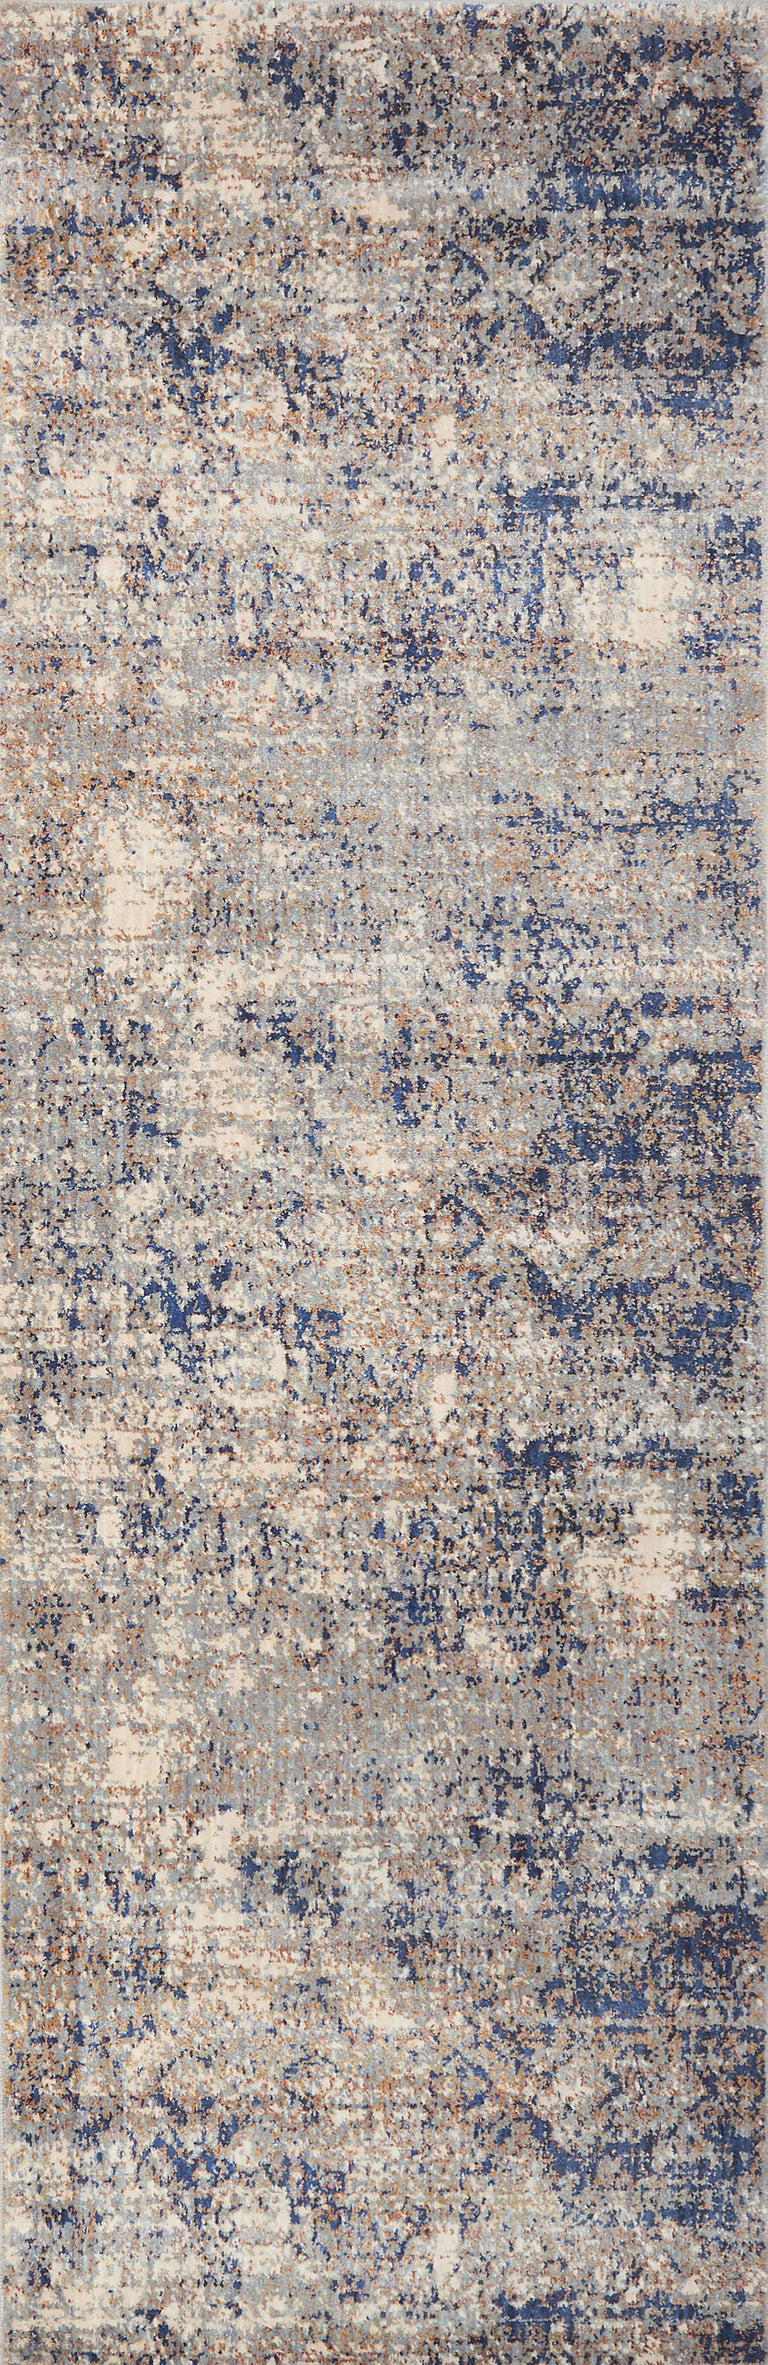 Loloi Rugs Anastasia Collection Rug in Mist, Blue - 7'10" x 10'10"